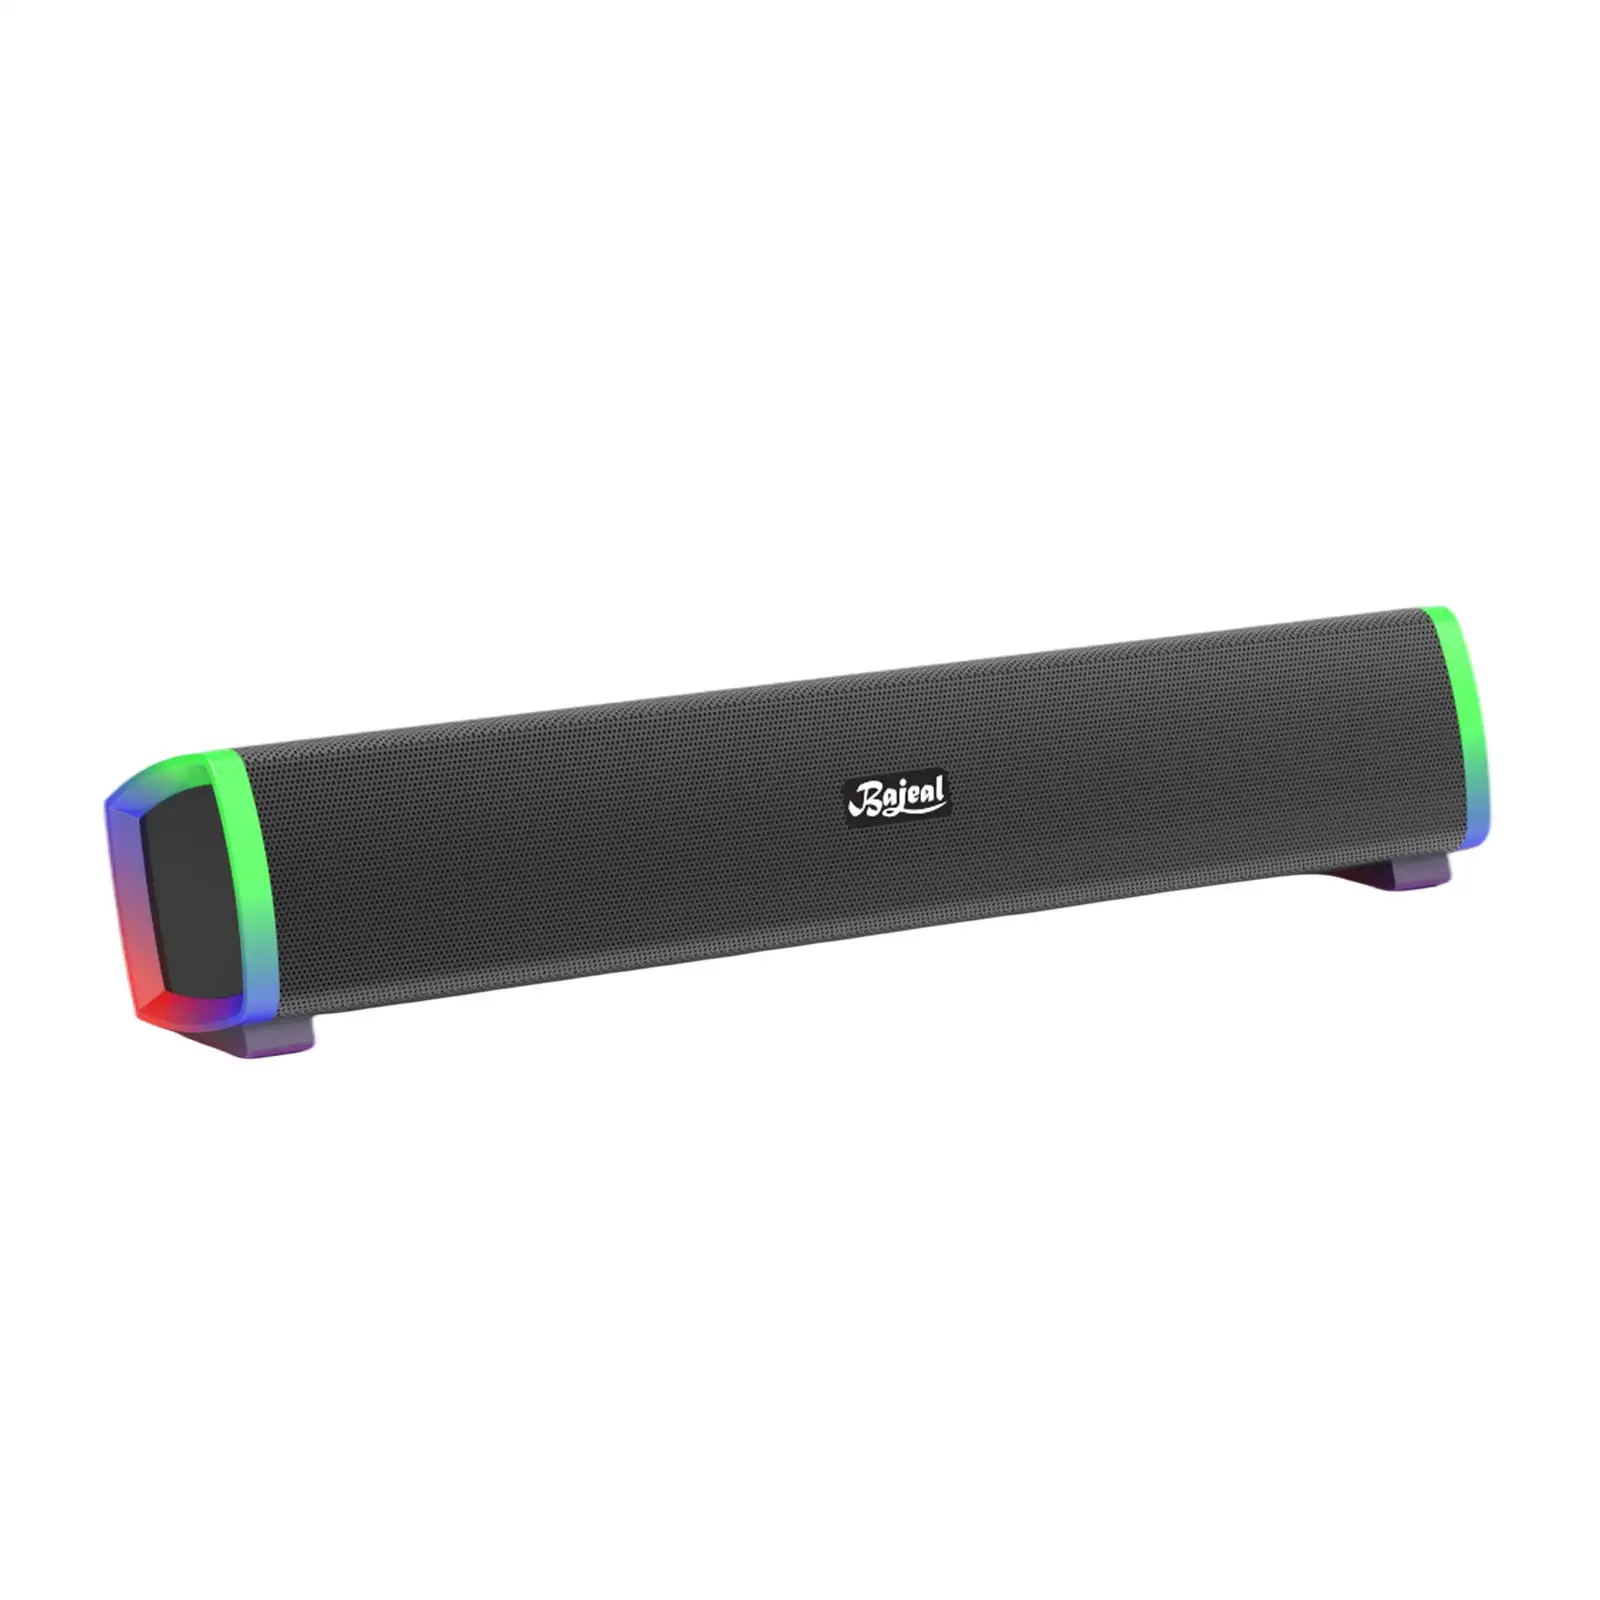 Computer Sound Bar Home Theater Stereo Bass RGB Color Lights Support TF Card for Laptop TV